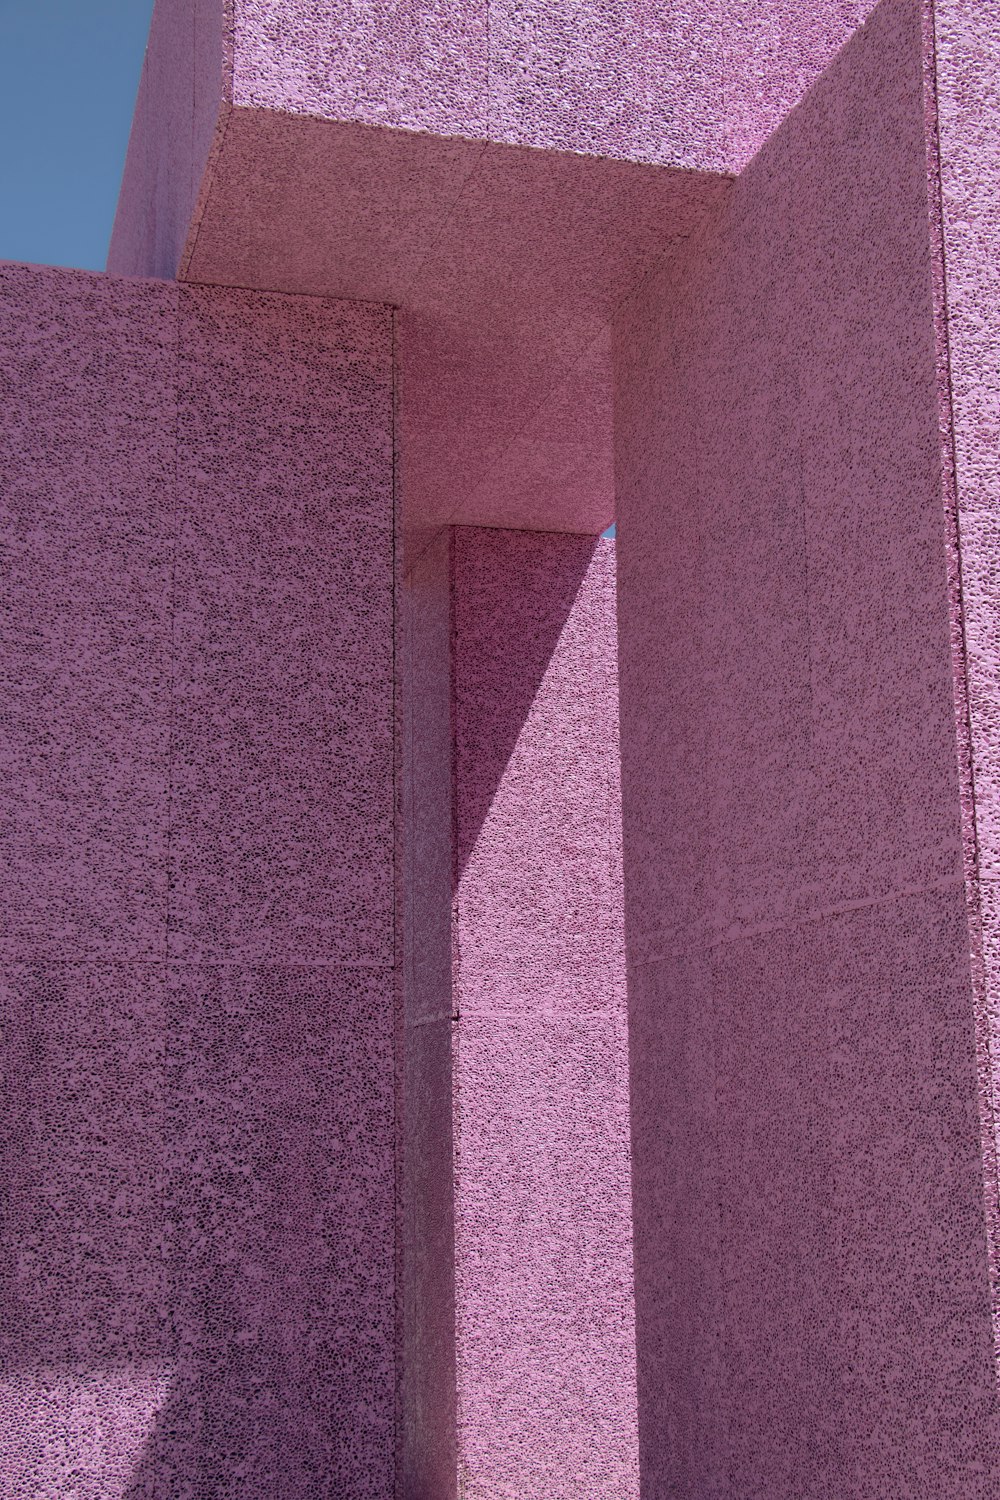 close-up photo of pink painted wall